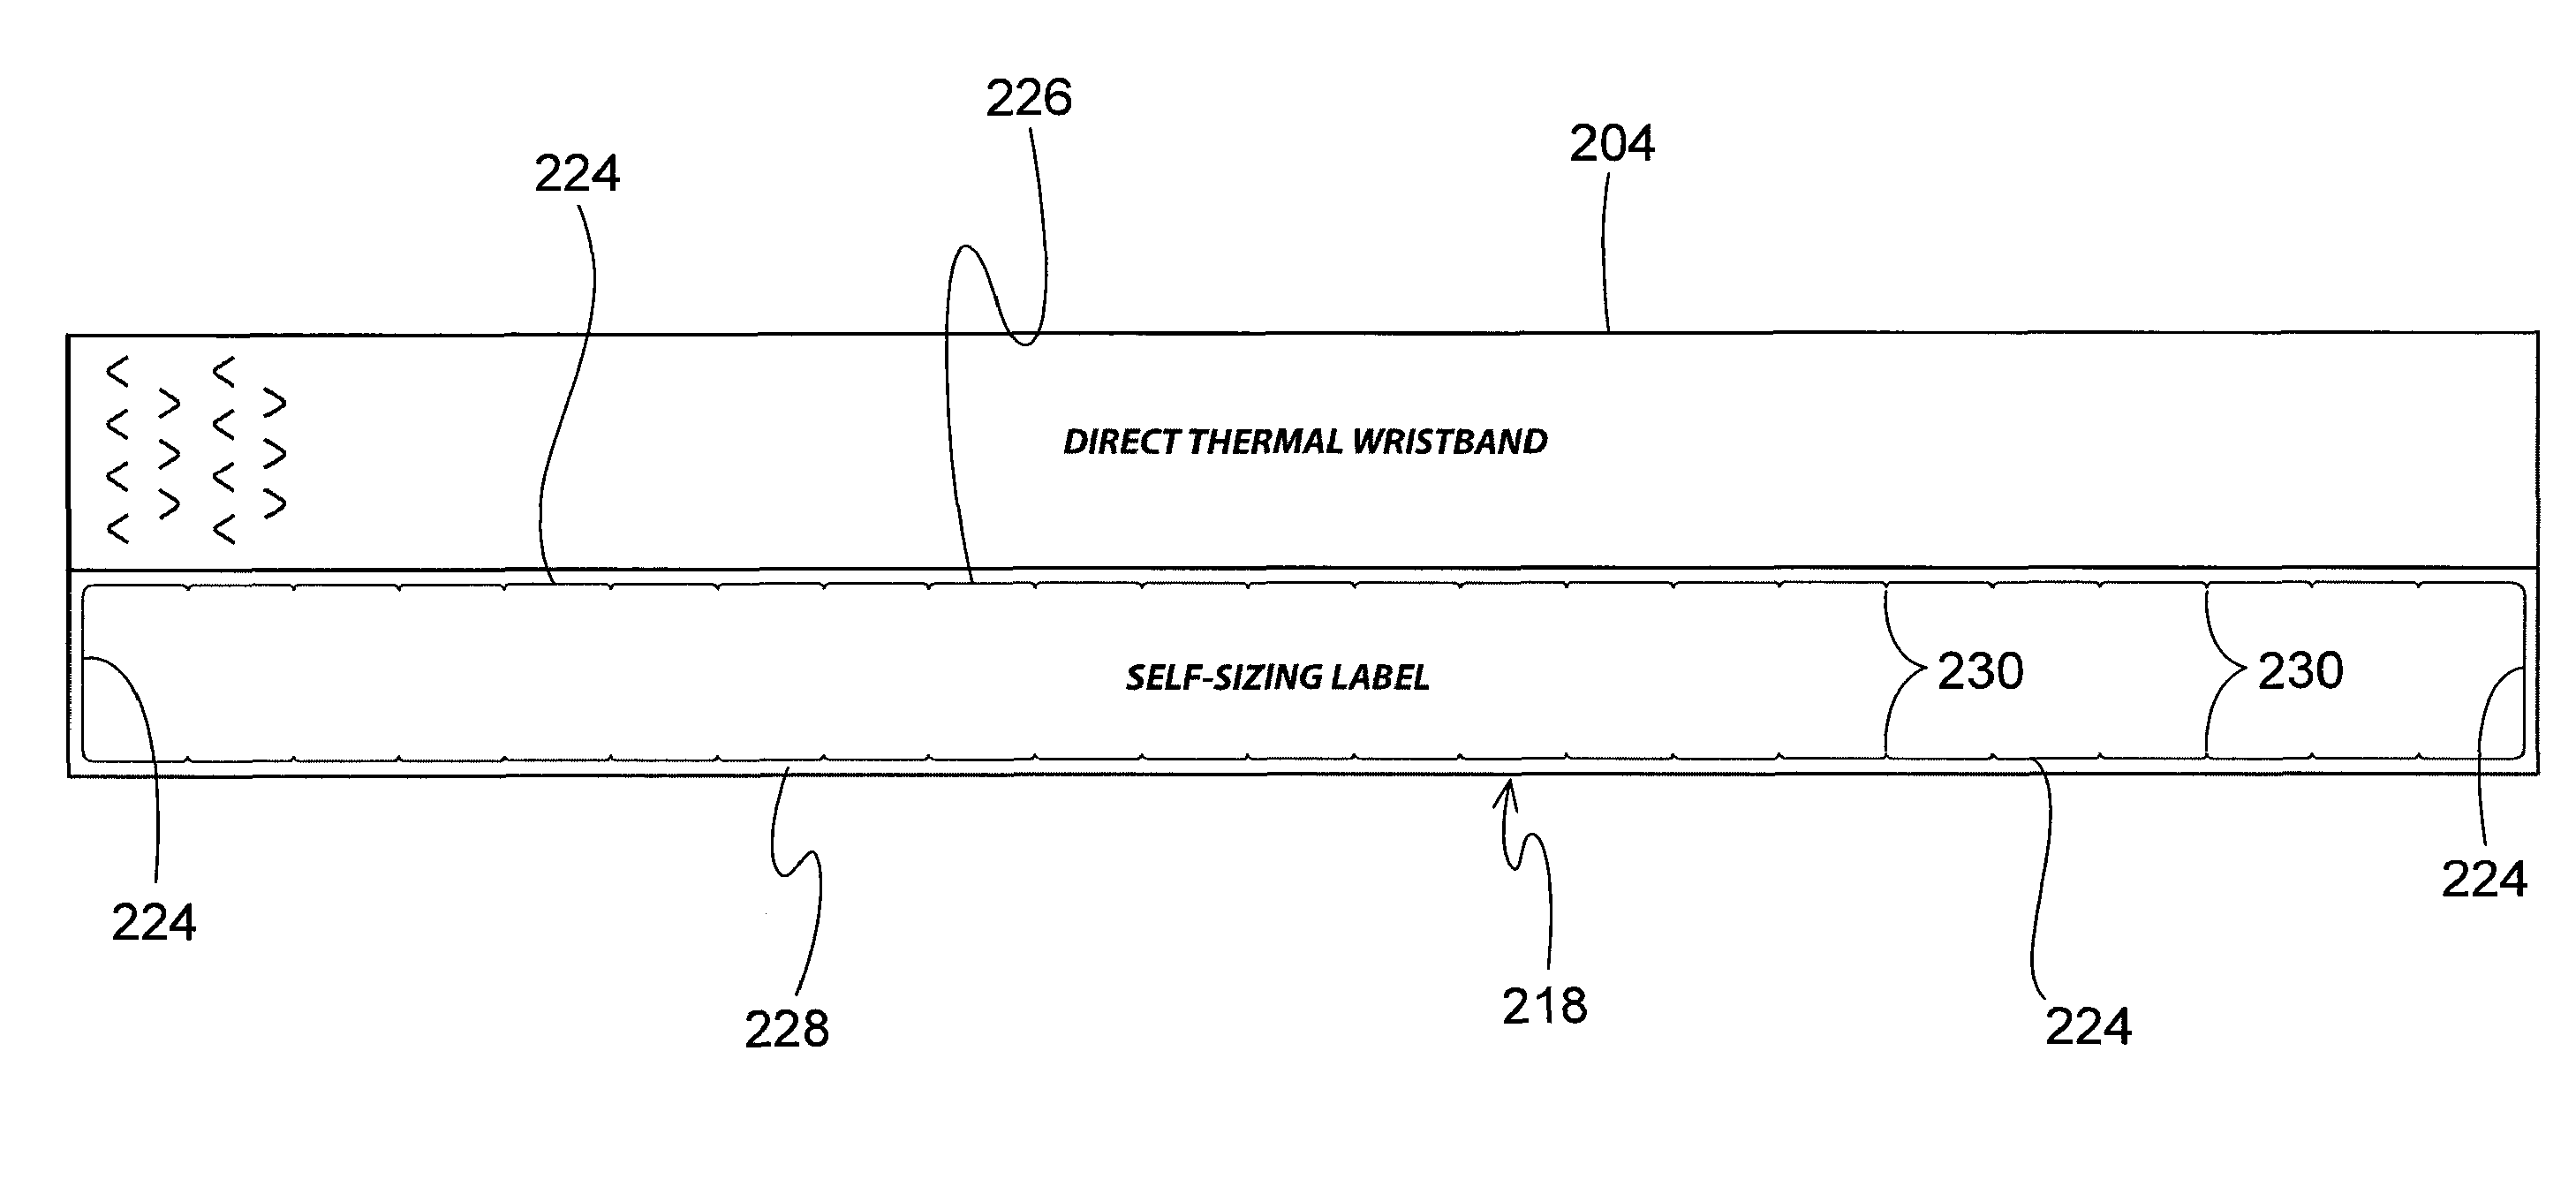 Continuous strip of thermal wristband/label forms